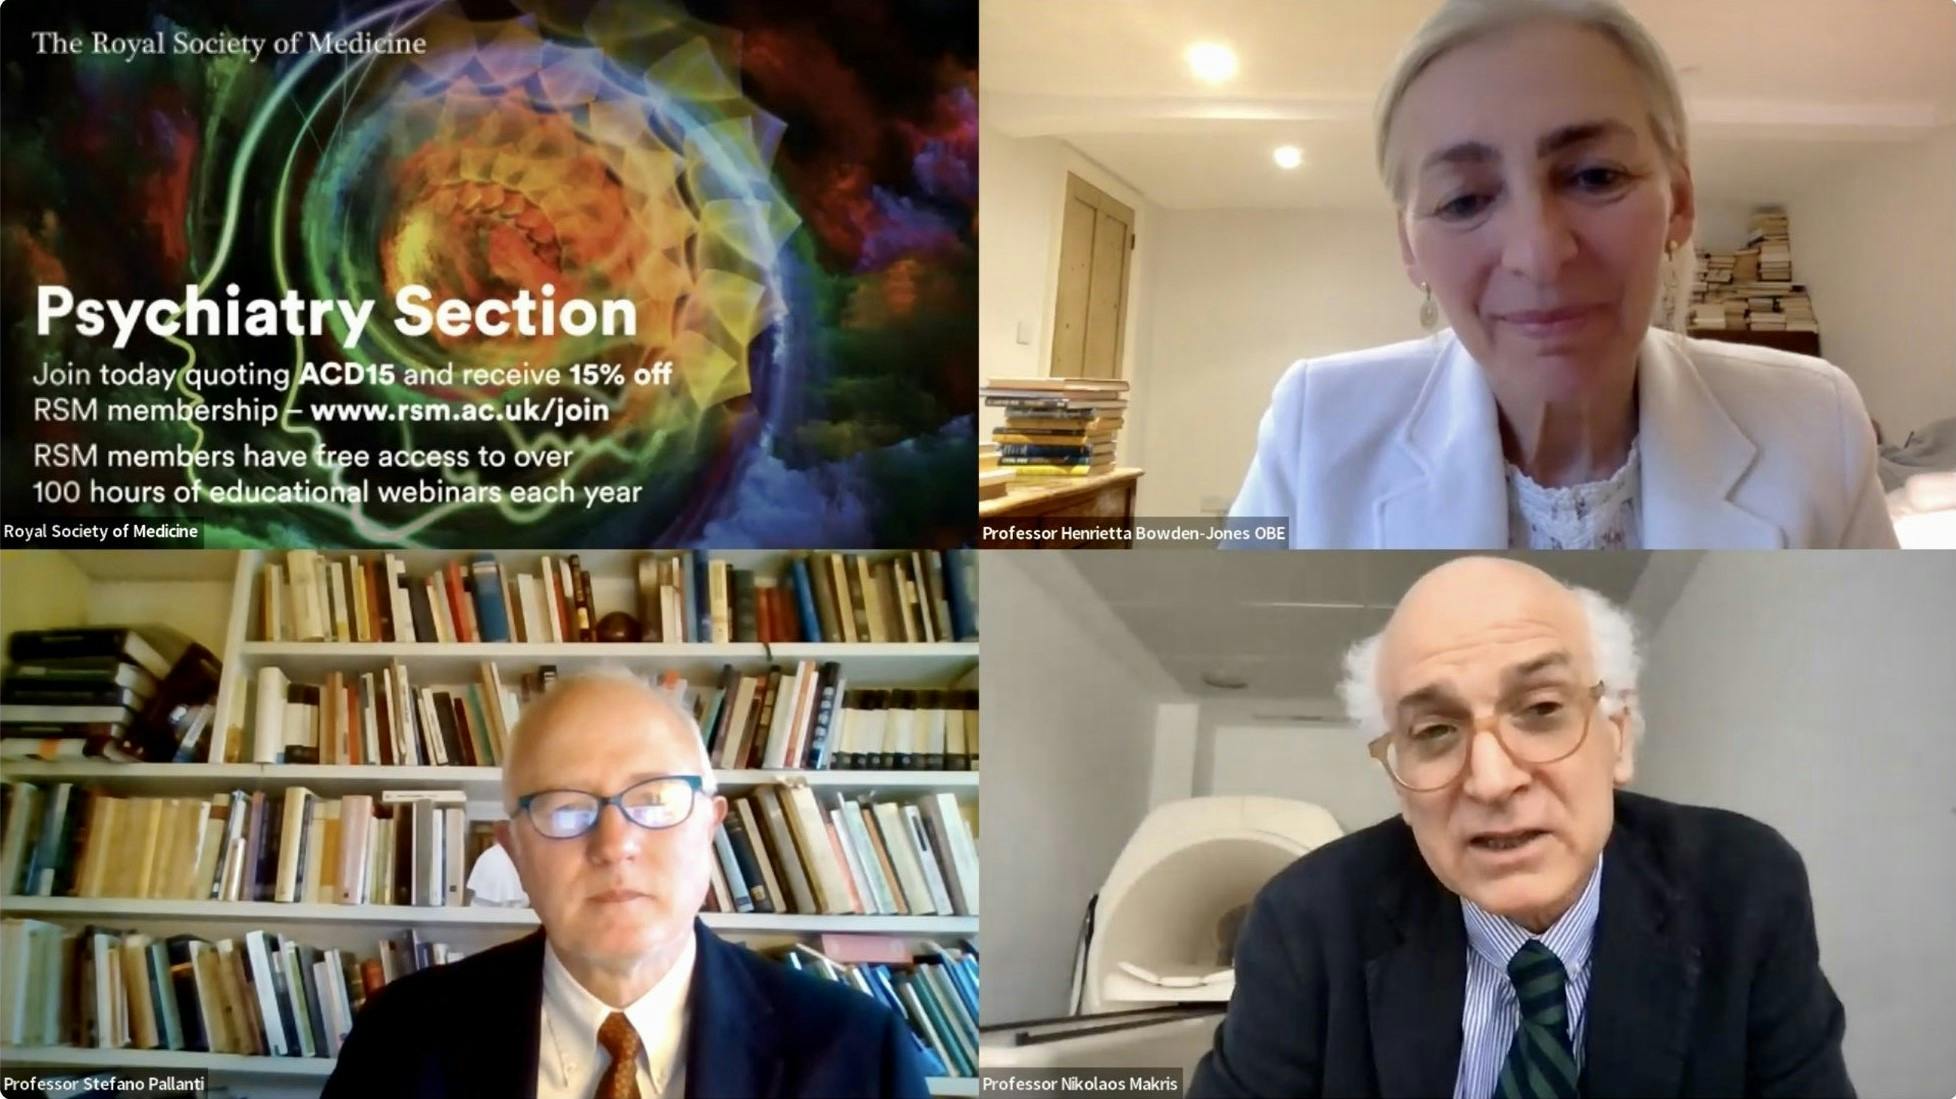 Screenshot of the webinar "Neuromodulation in Psychiatry" organized by the Royal Society of Medicine in which Dr. Stefano Pallanti and Dr. Nikos Makris were featured as speakers.